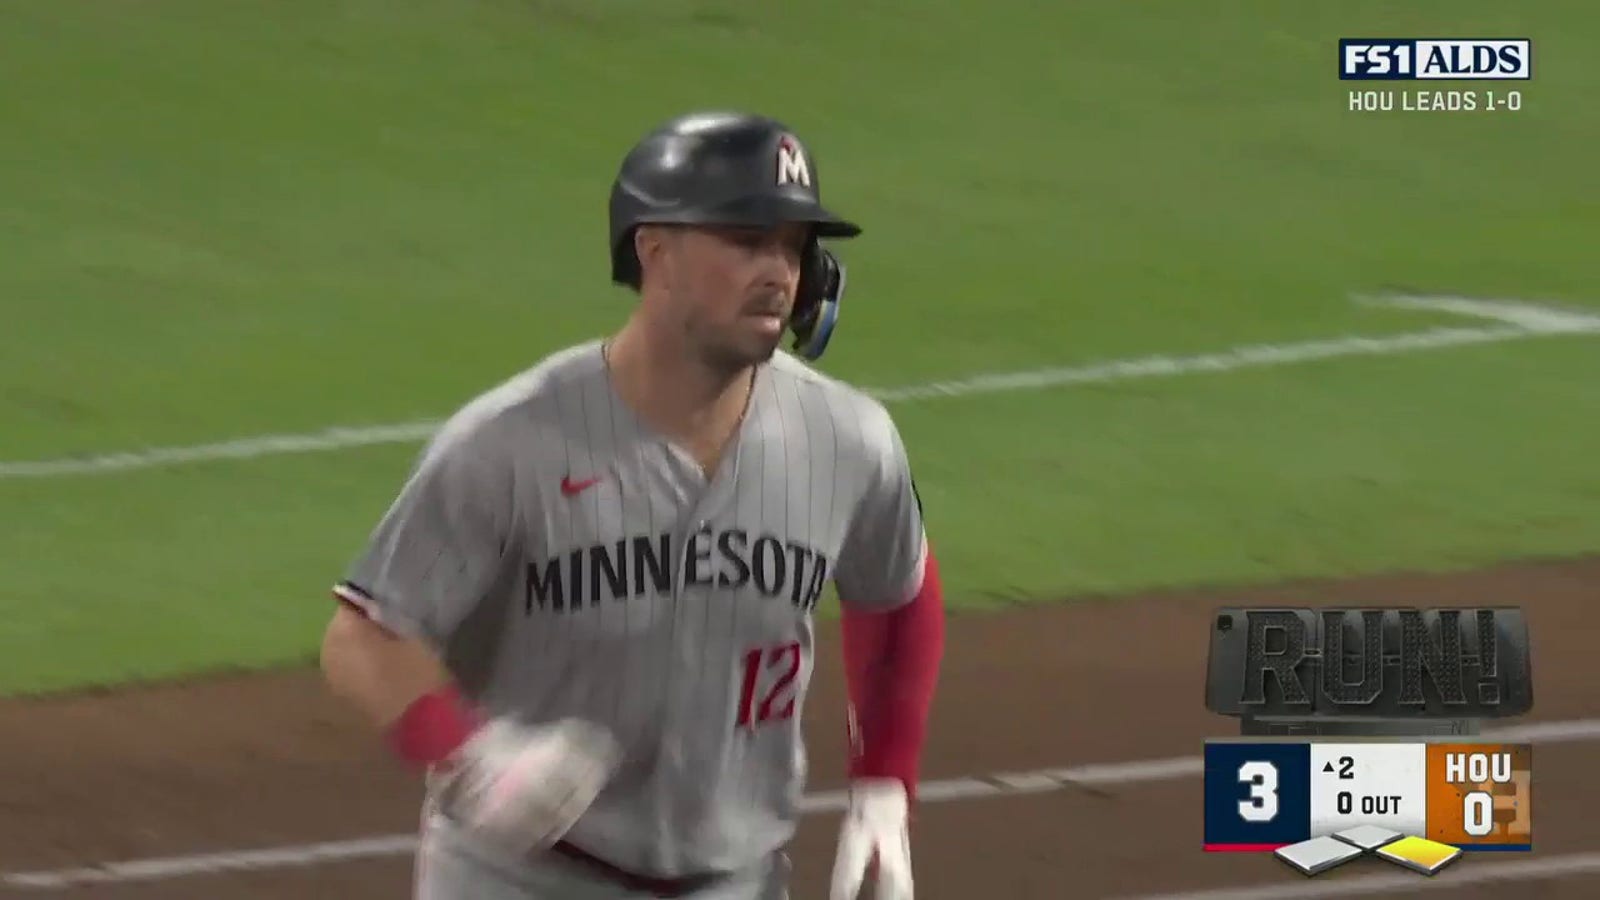 Kyle Farmer smashes a two-bustle homer, extending the Twins' lead over the Astros